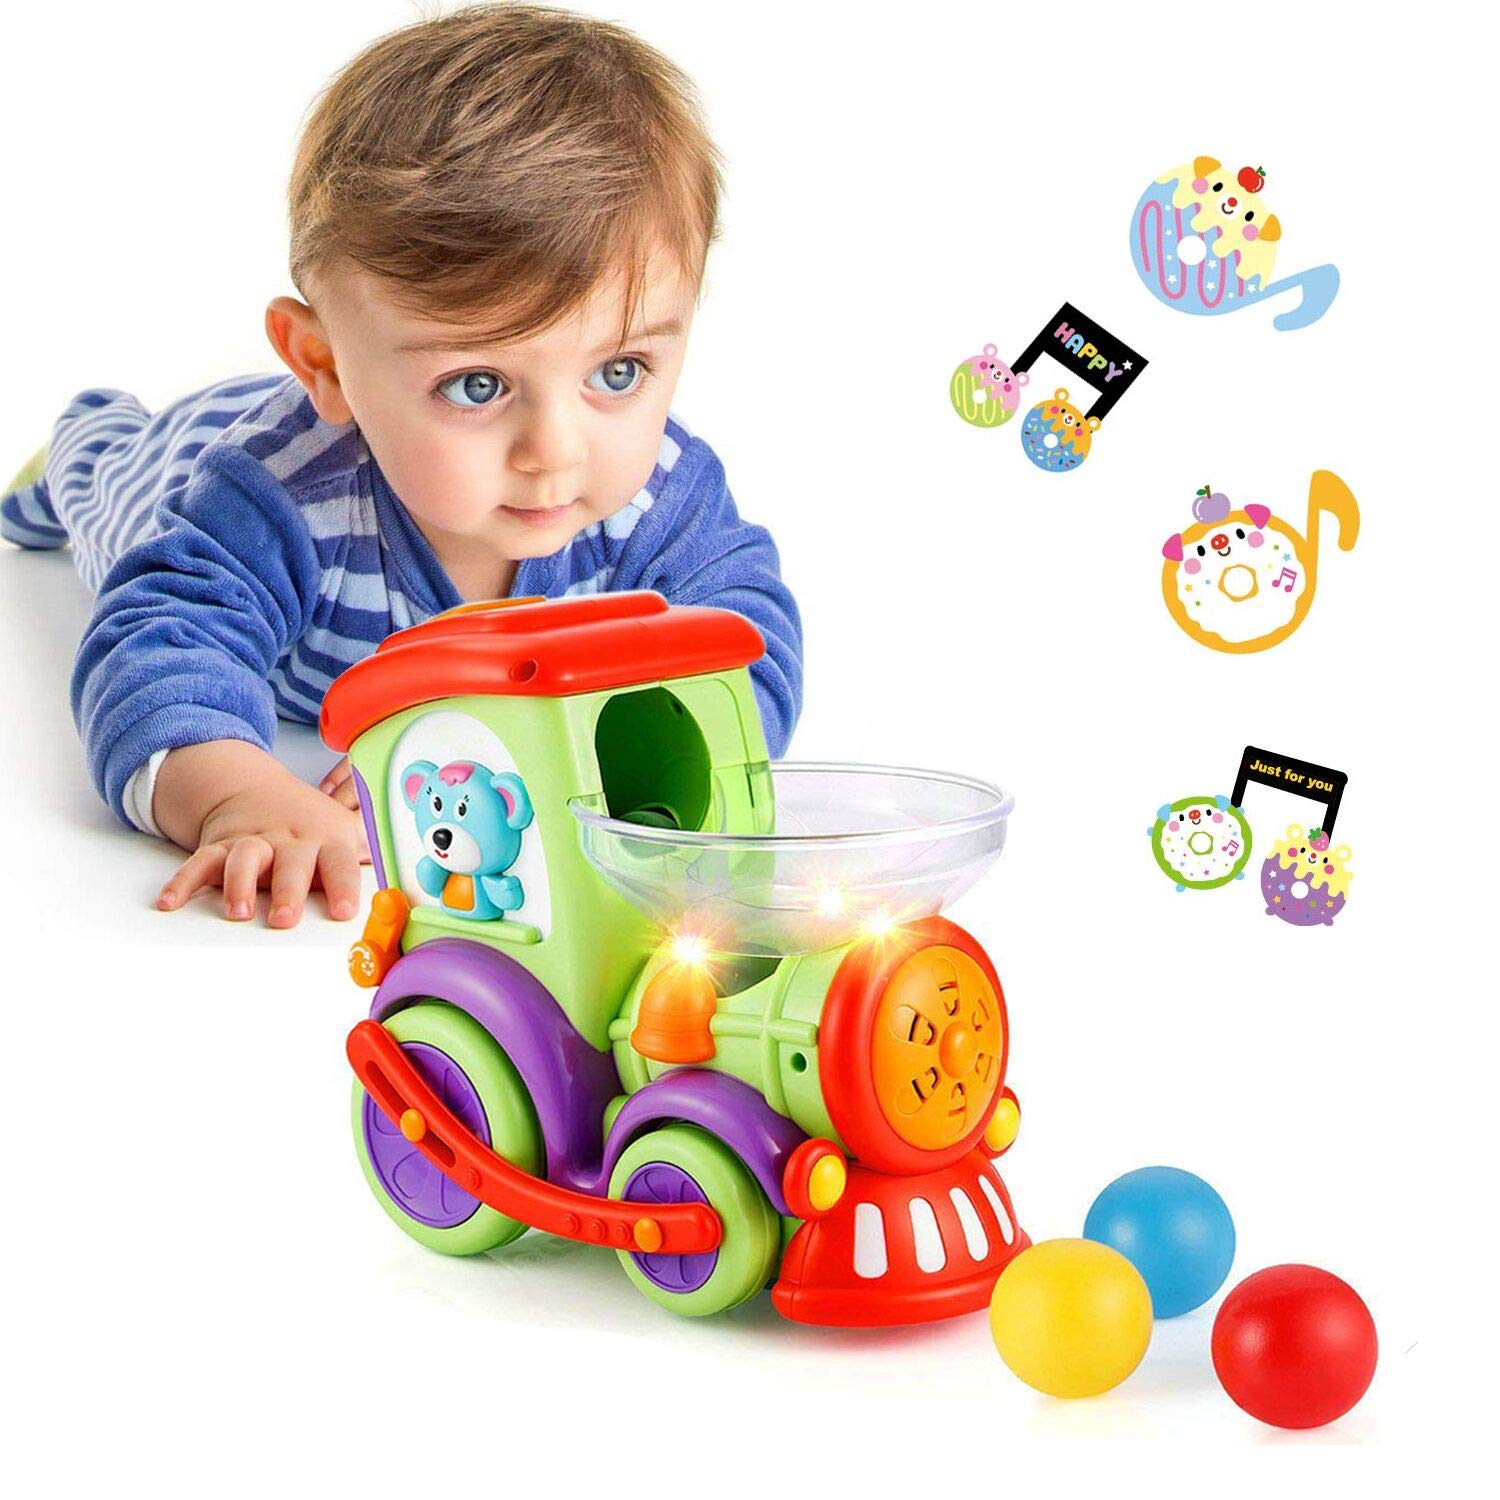 LUKAT Toddler Toy for 1 2 3 4 Years Old Baby Activity Early Educational Toys